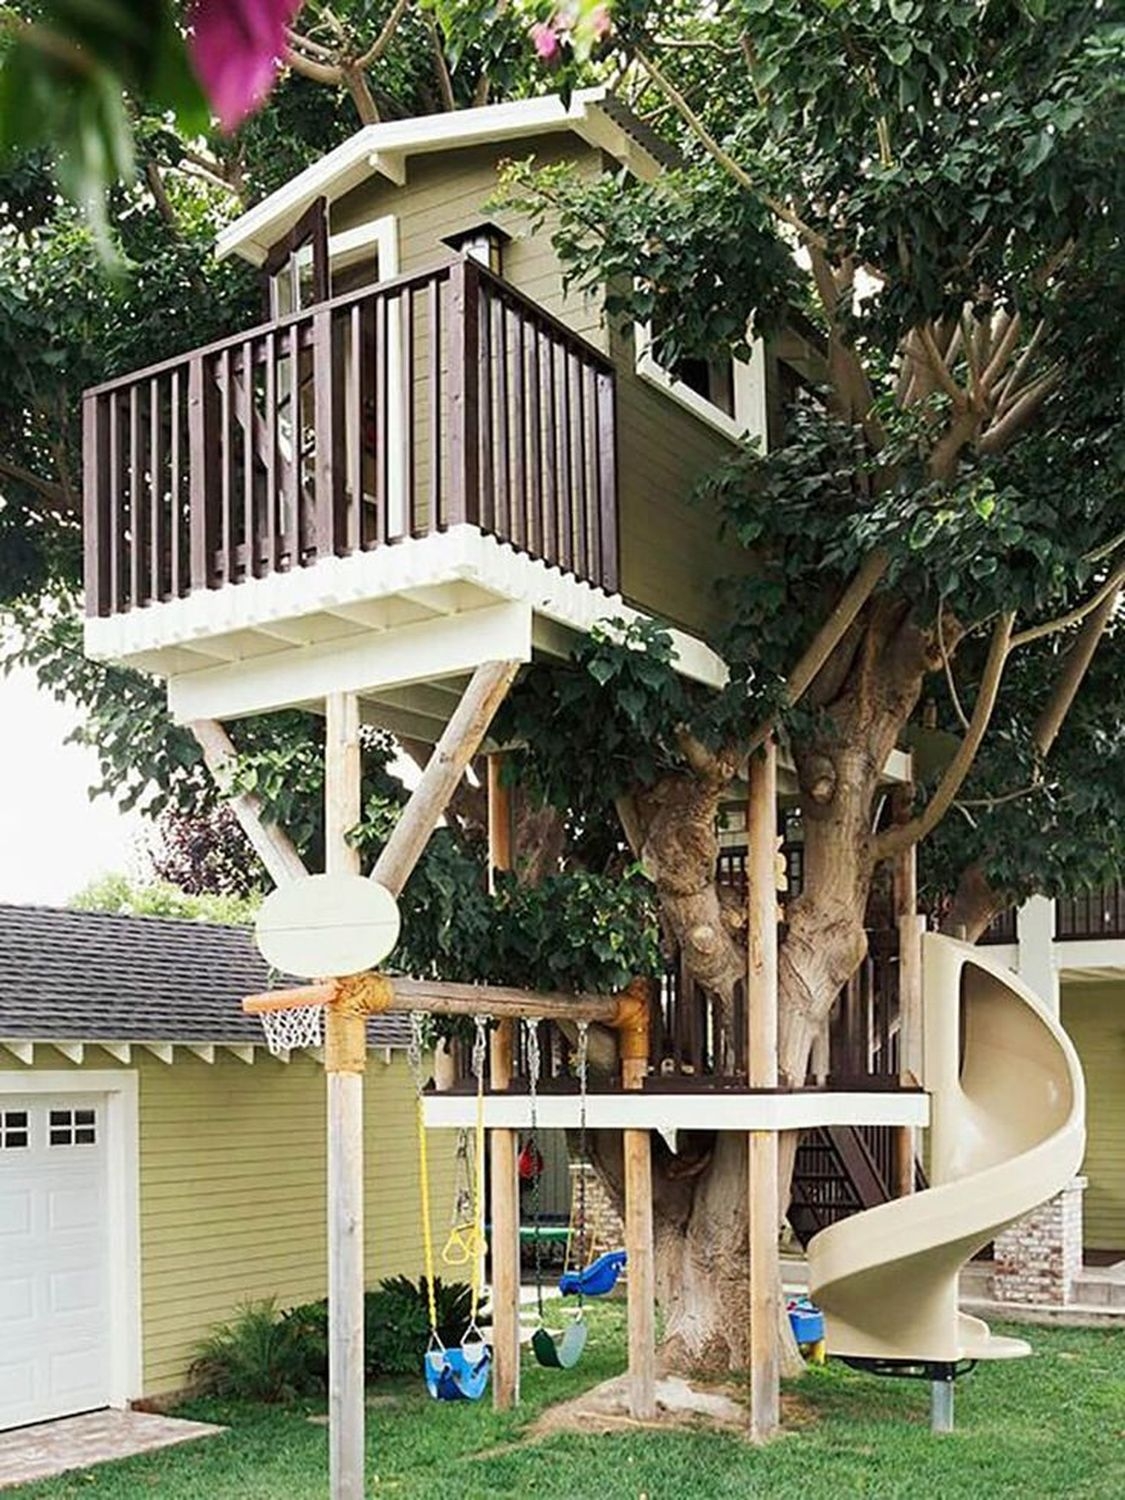 Wooden house with slide